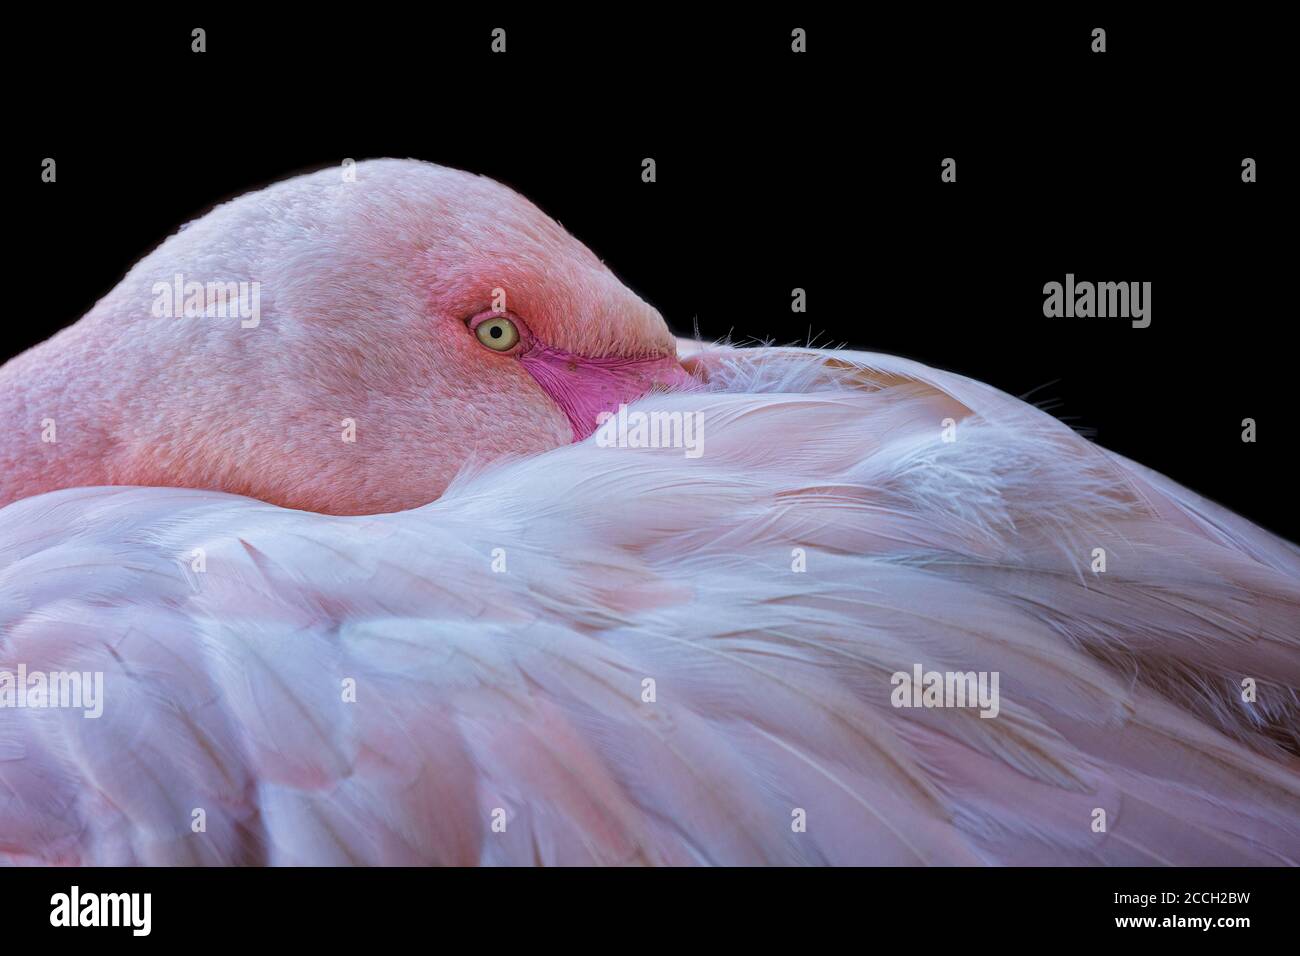 Close-up flamingo with a black background Stock Photo